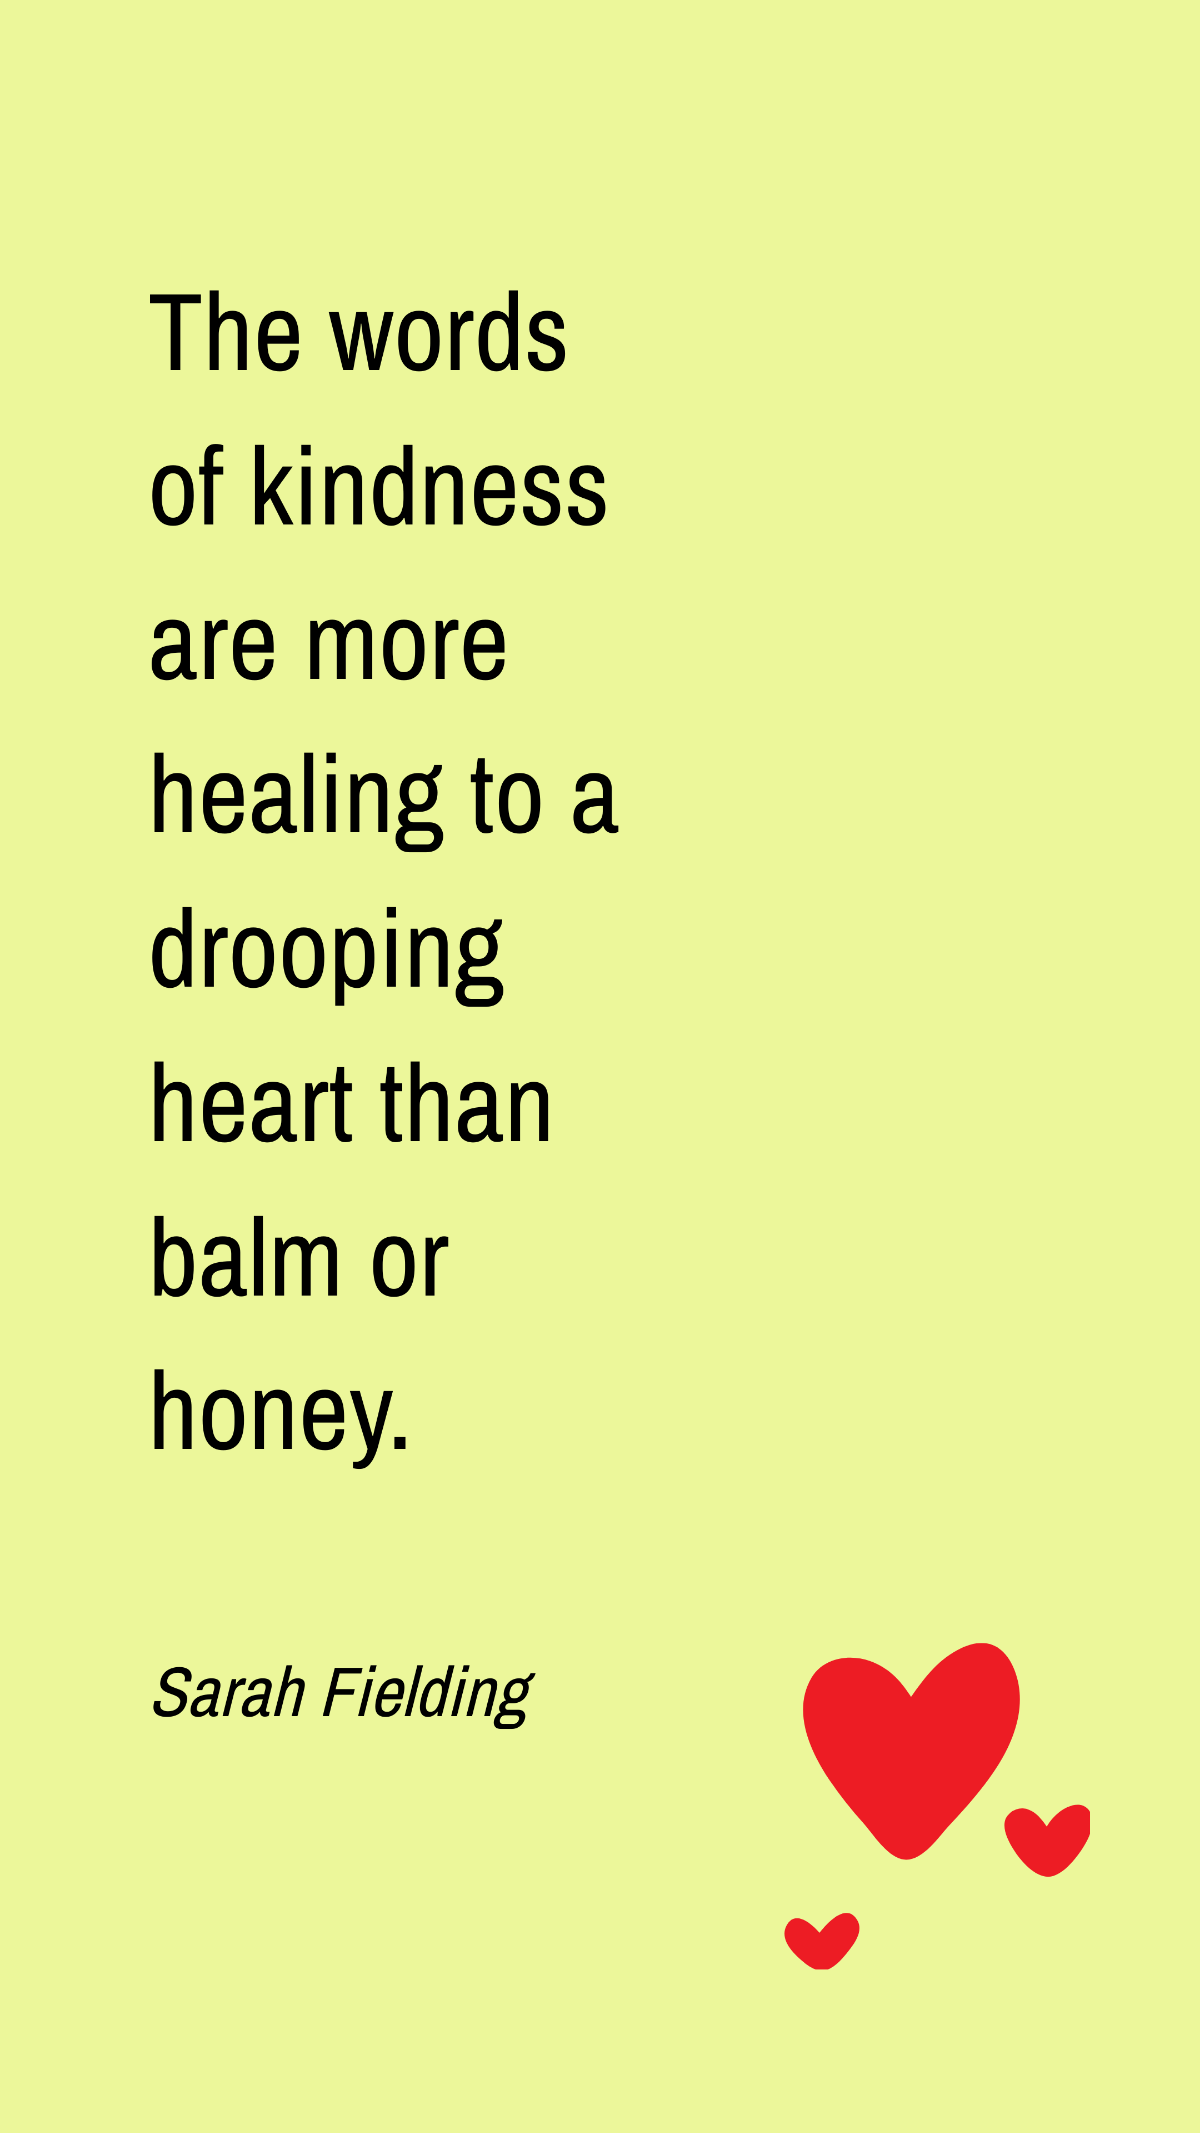 Free Sarah Fielding - The words of kindness are more healing to a drooping heart than balm or honey. Template